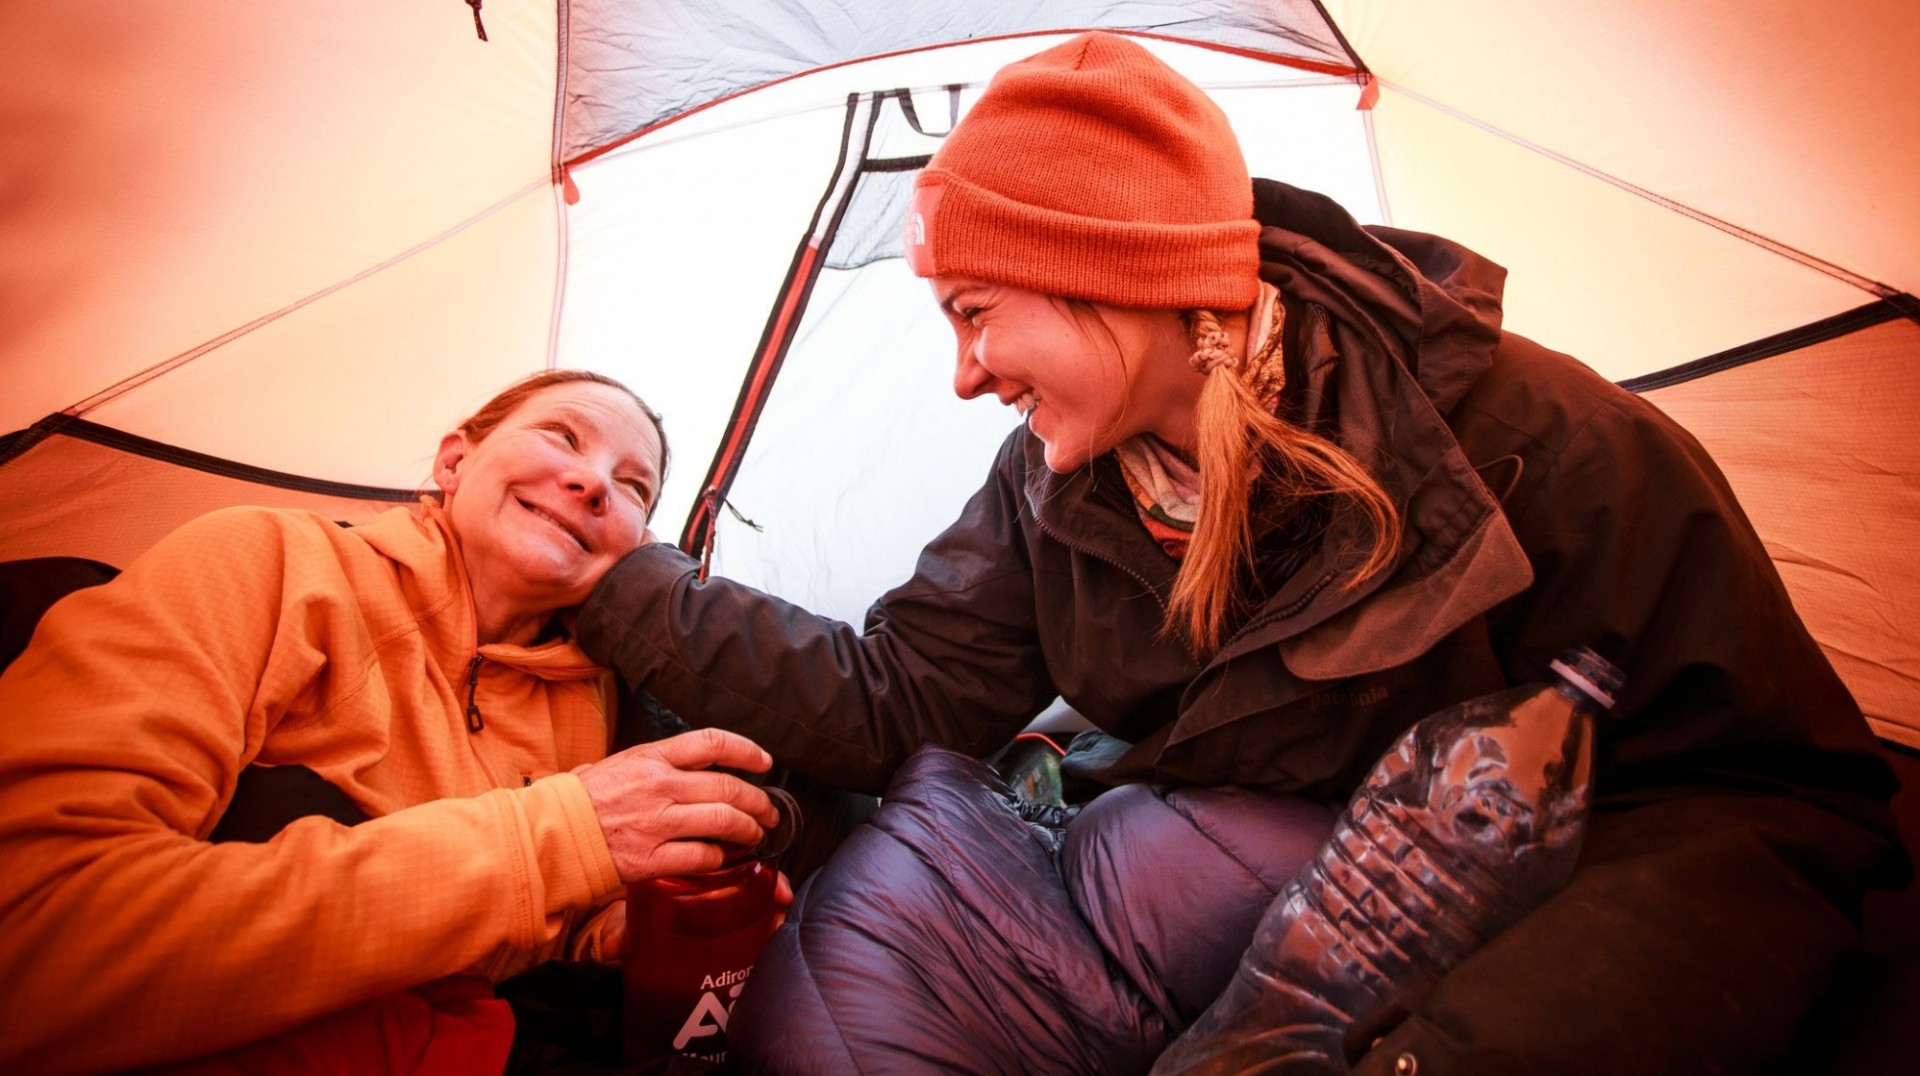 Isabella, left, and Bella shared a moment in their tent at Camp 1 along their climb up Aconcagua. Photo by Max Whittaker for The New York Times